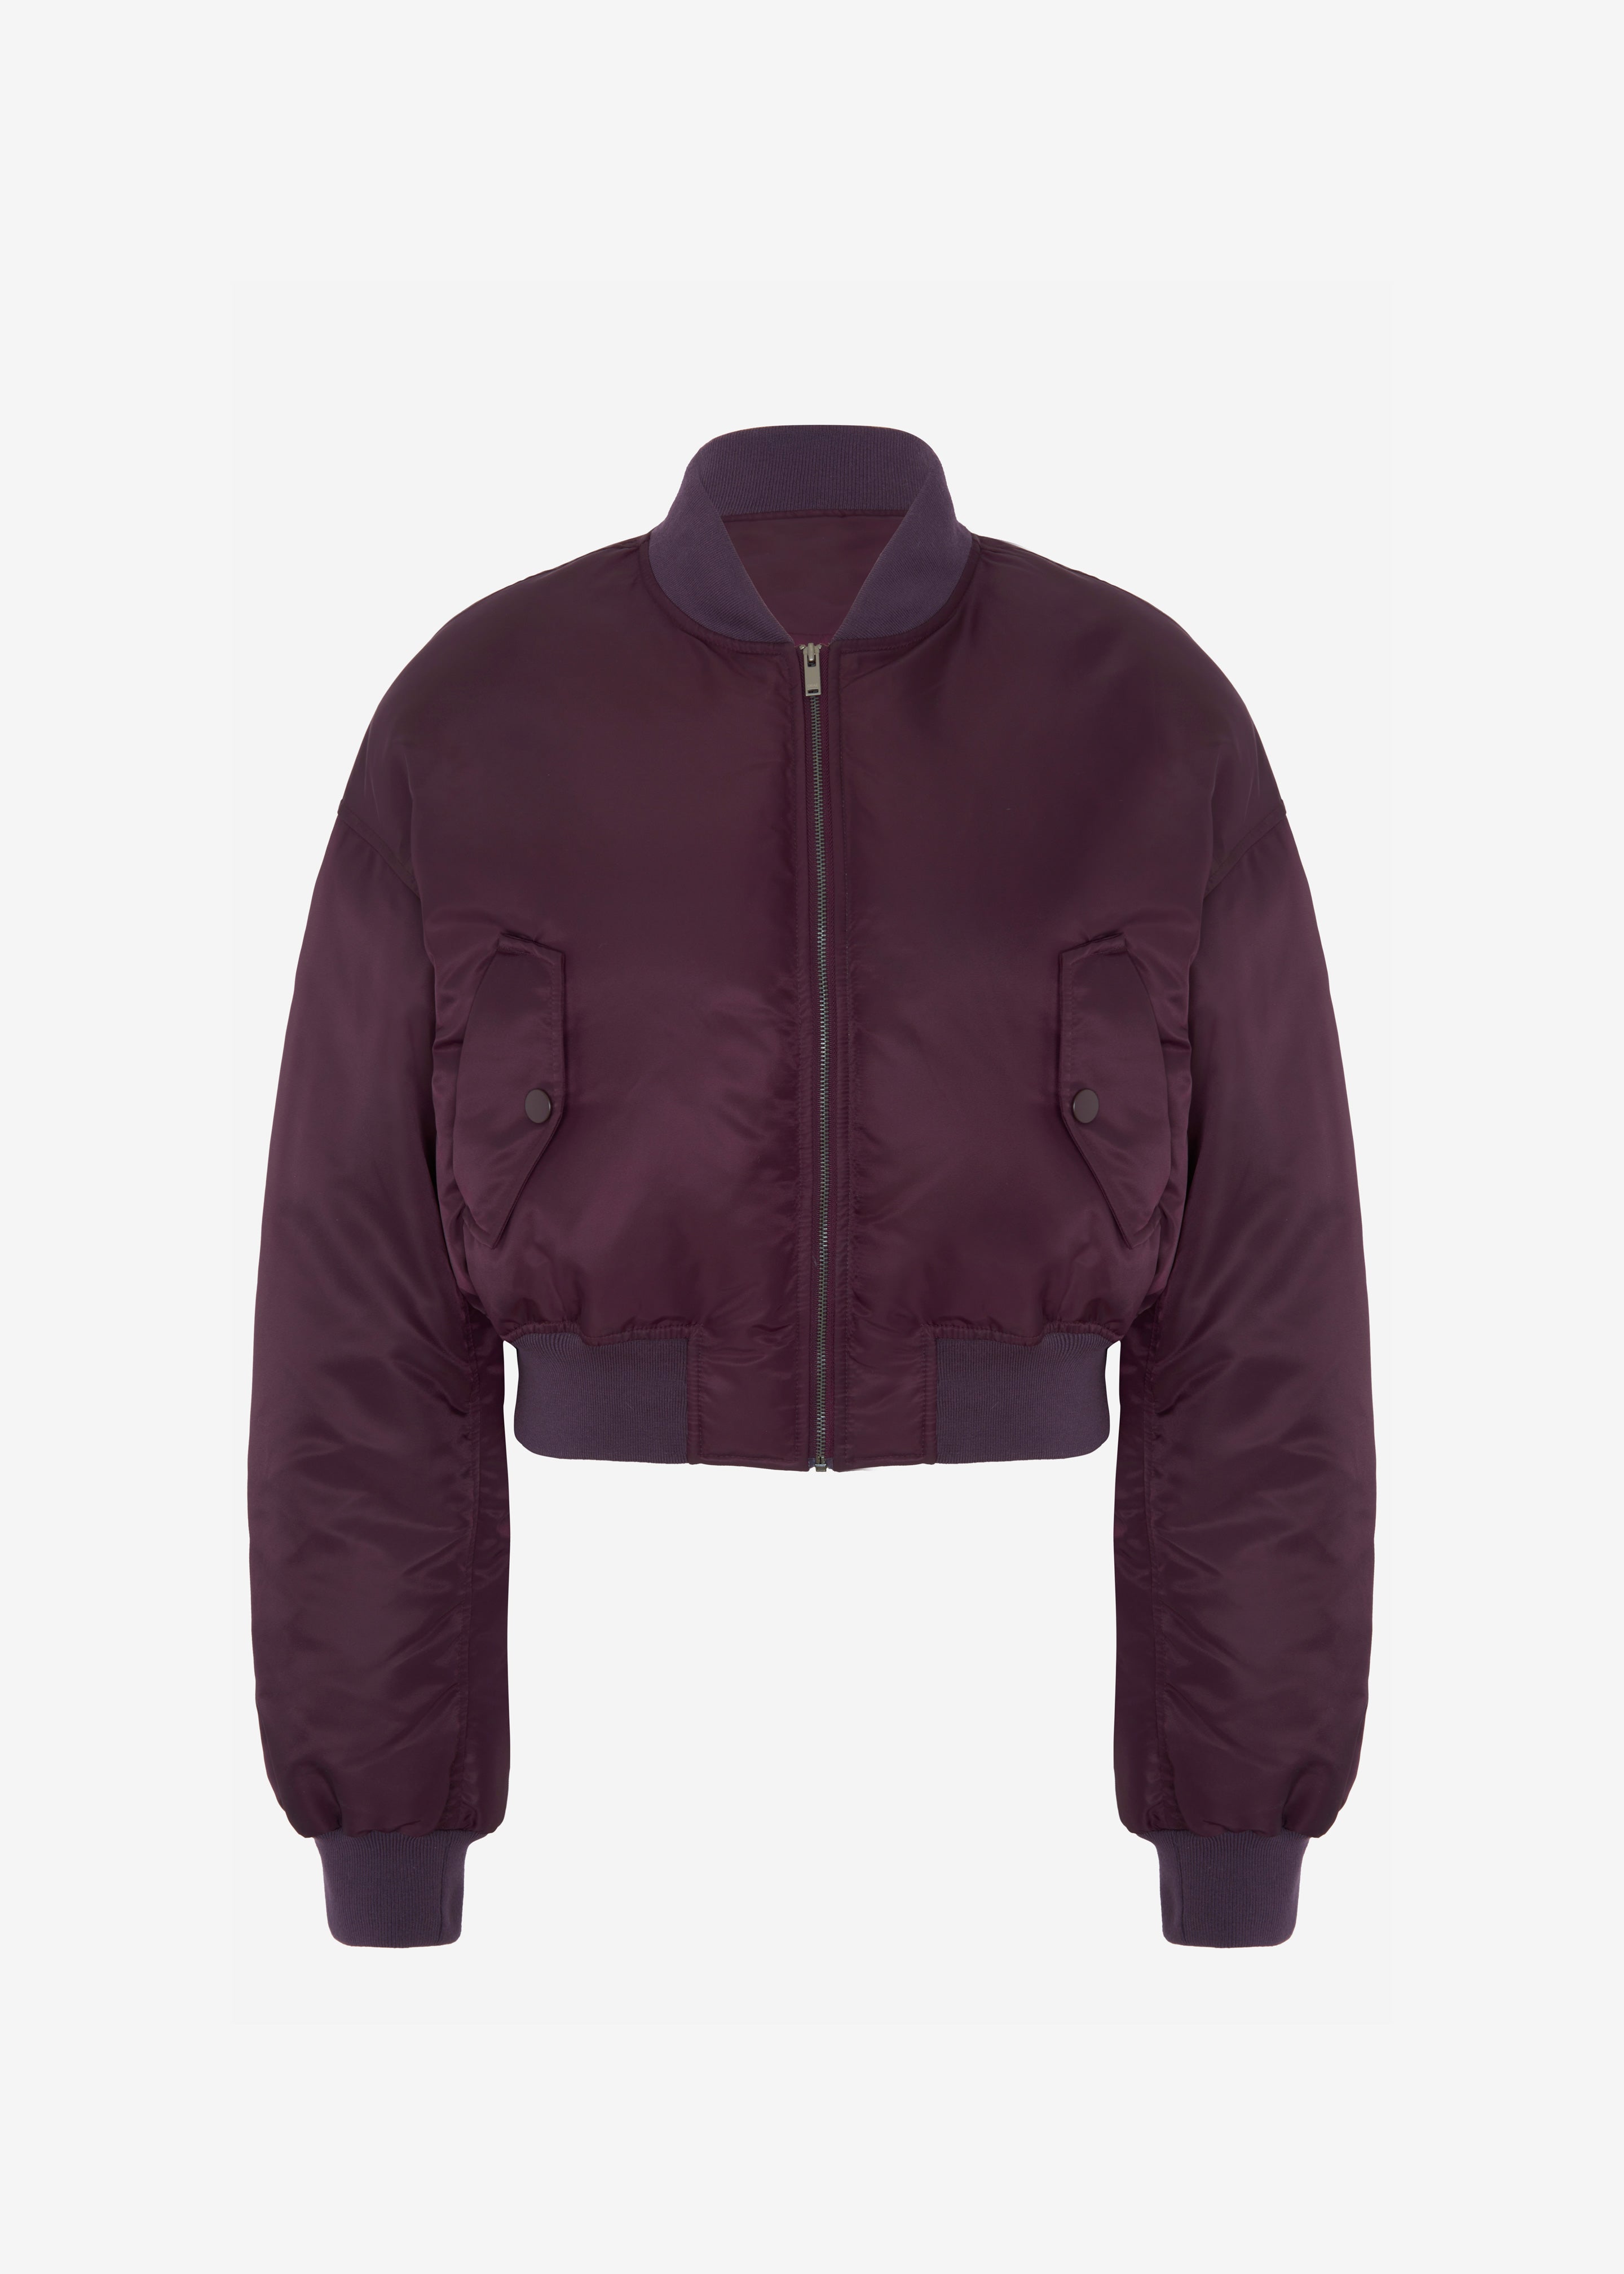 Houghton Cropped Bomber - Prune - 11